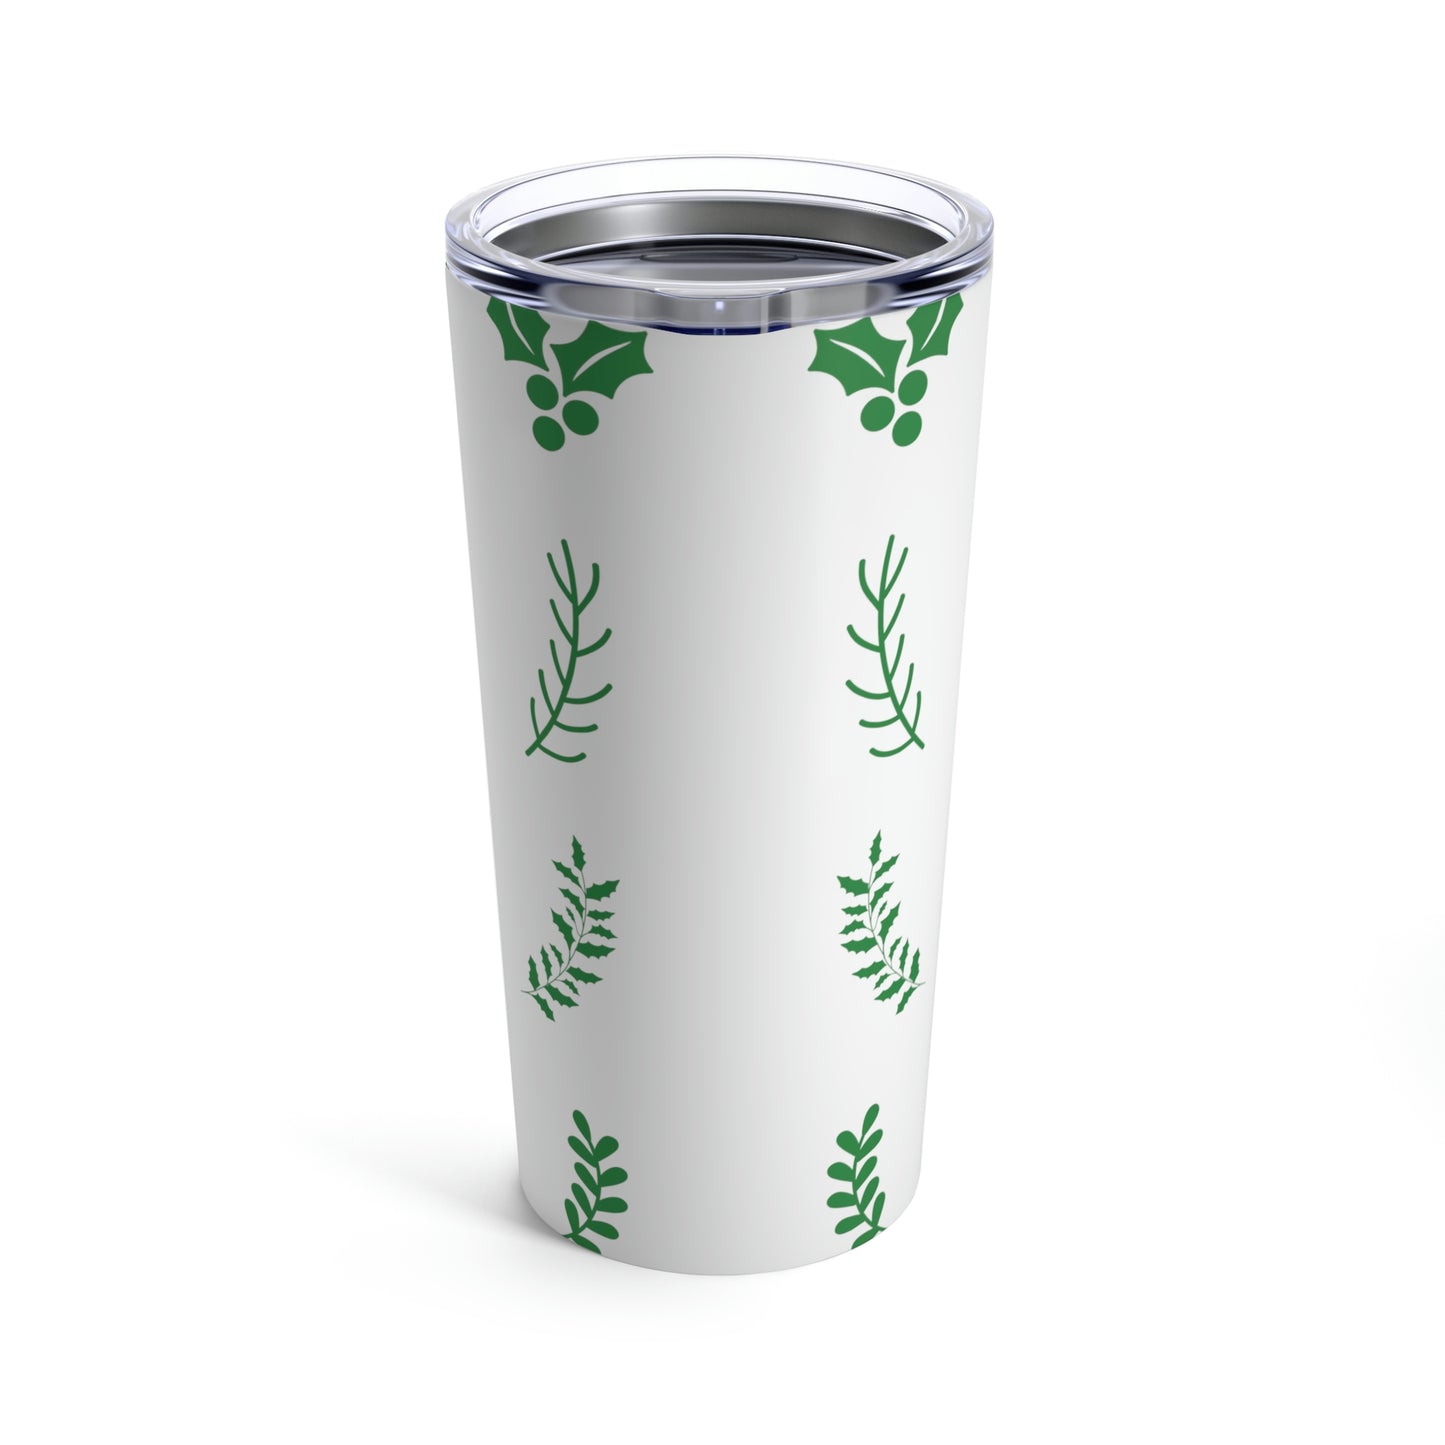 We Should Kiss Leaves Quotes Stainless Steel Hot or Cold Vacuum Tumbler 20oz